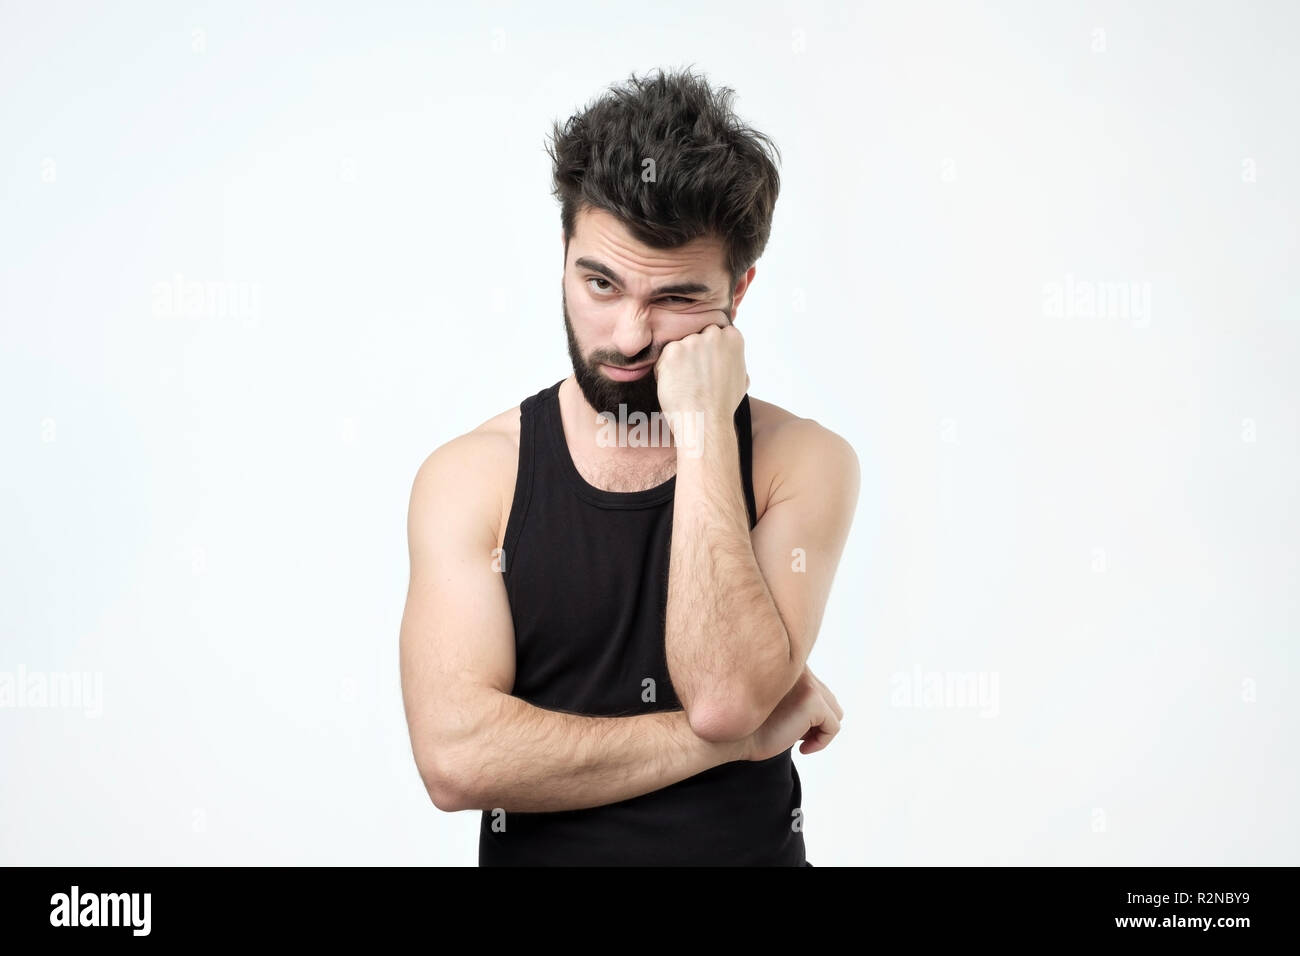 Tired hispanic guy with beard, being exhausted and wanting to get rest against gray background Stock Photo